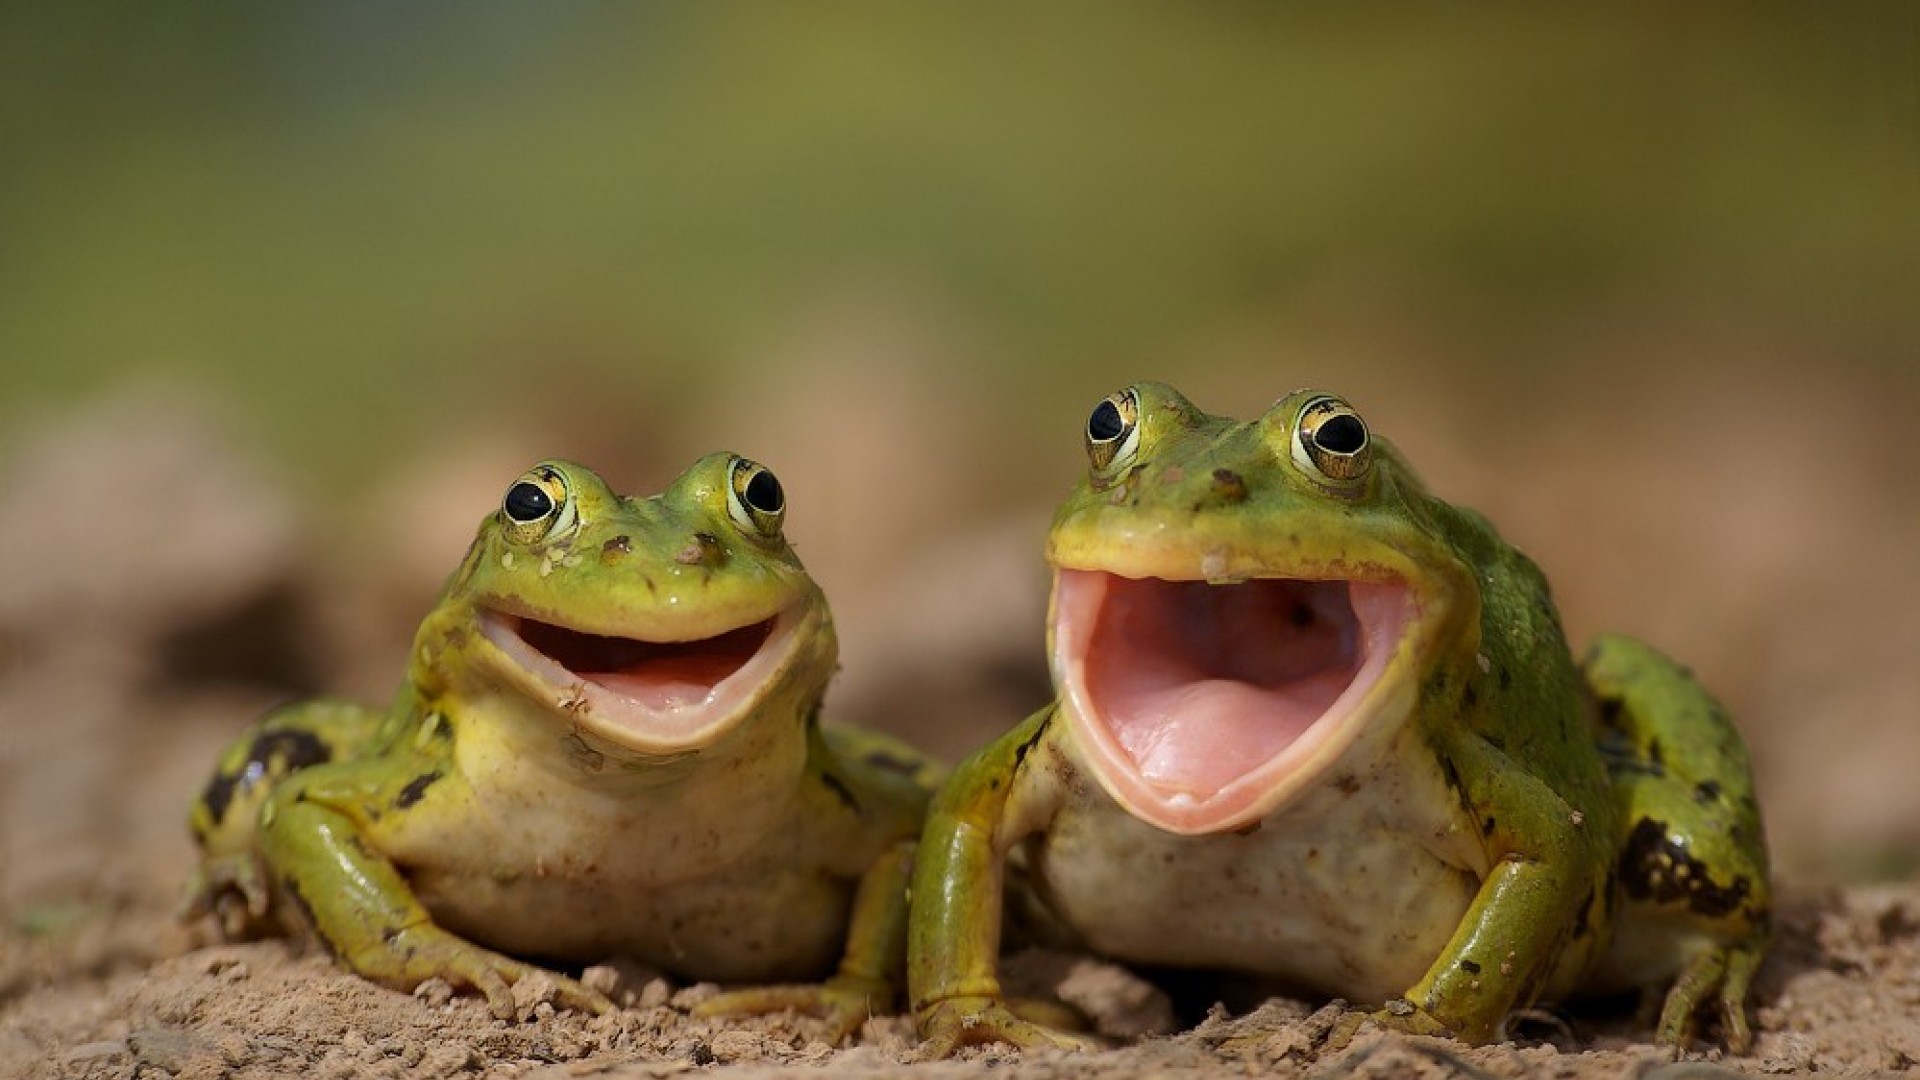 laughingfrogs